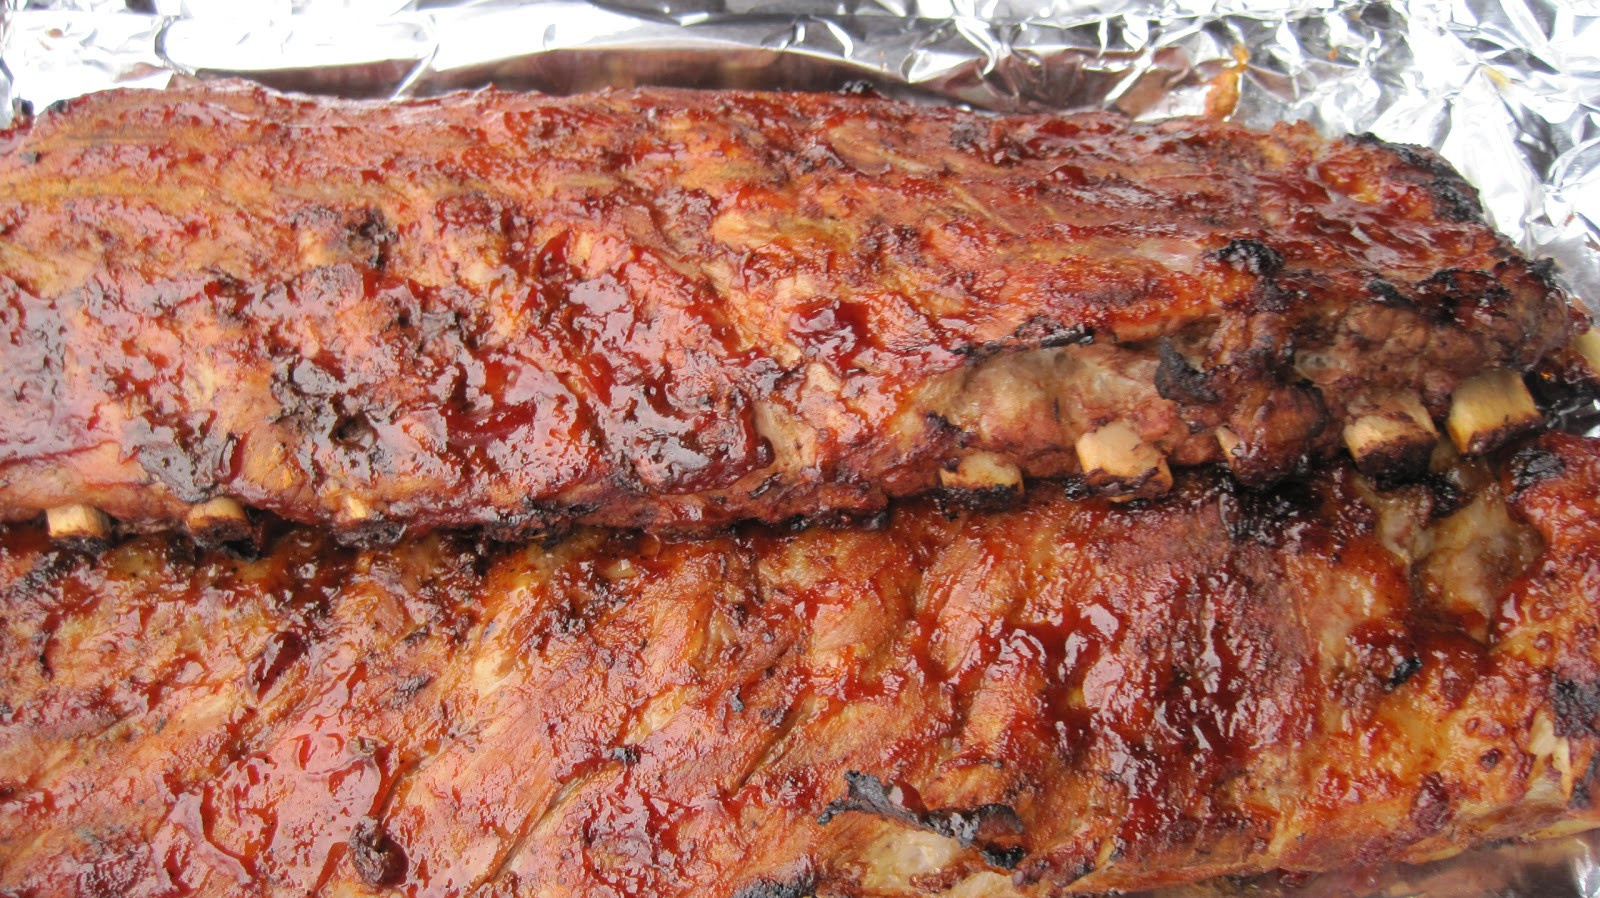 Bbq Pork Ribs In Oven
 pork bbq ribs oven baked